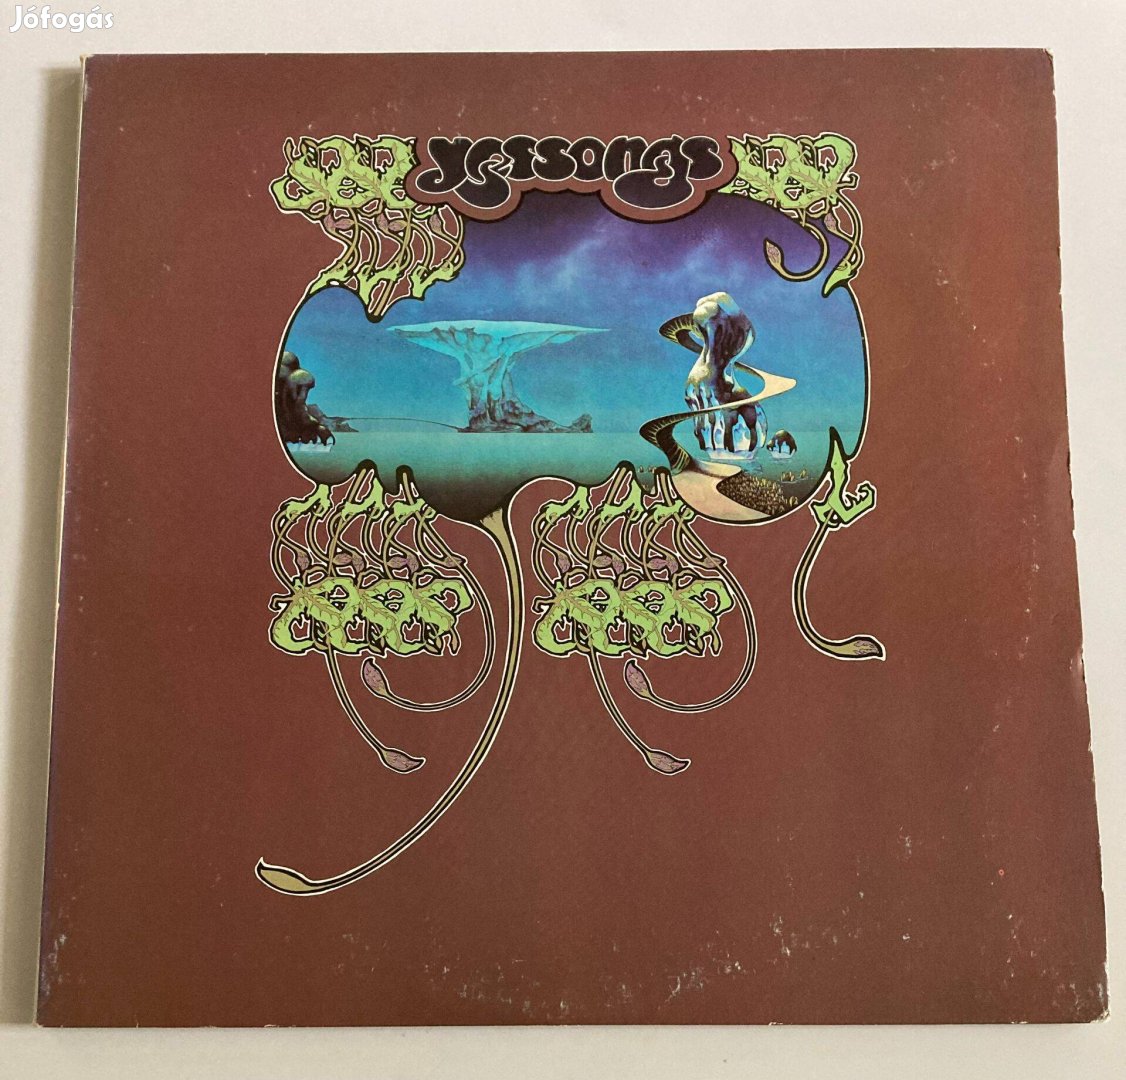 Yes - Yessongs (Made in Germany, 1973)